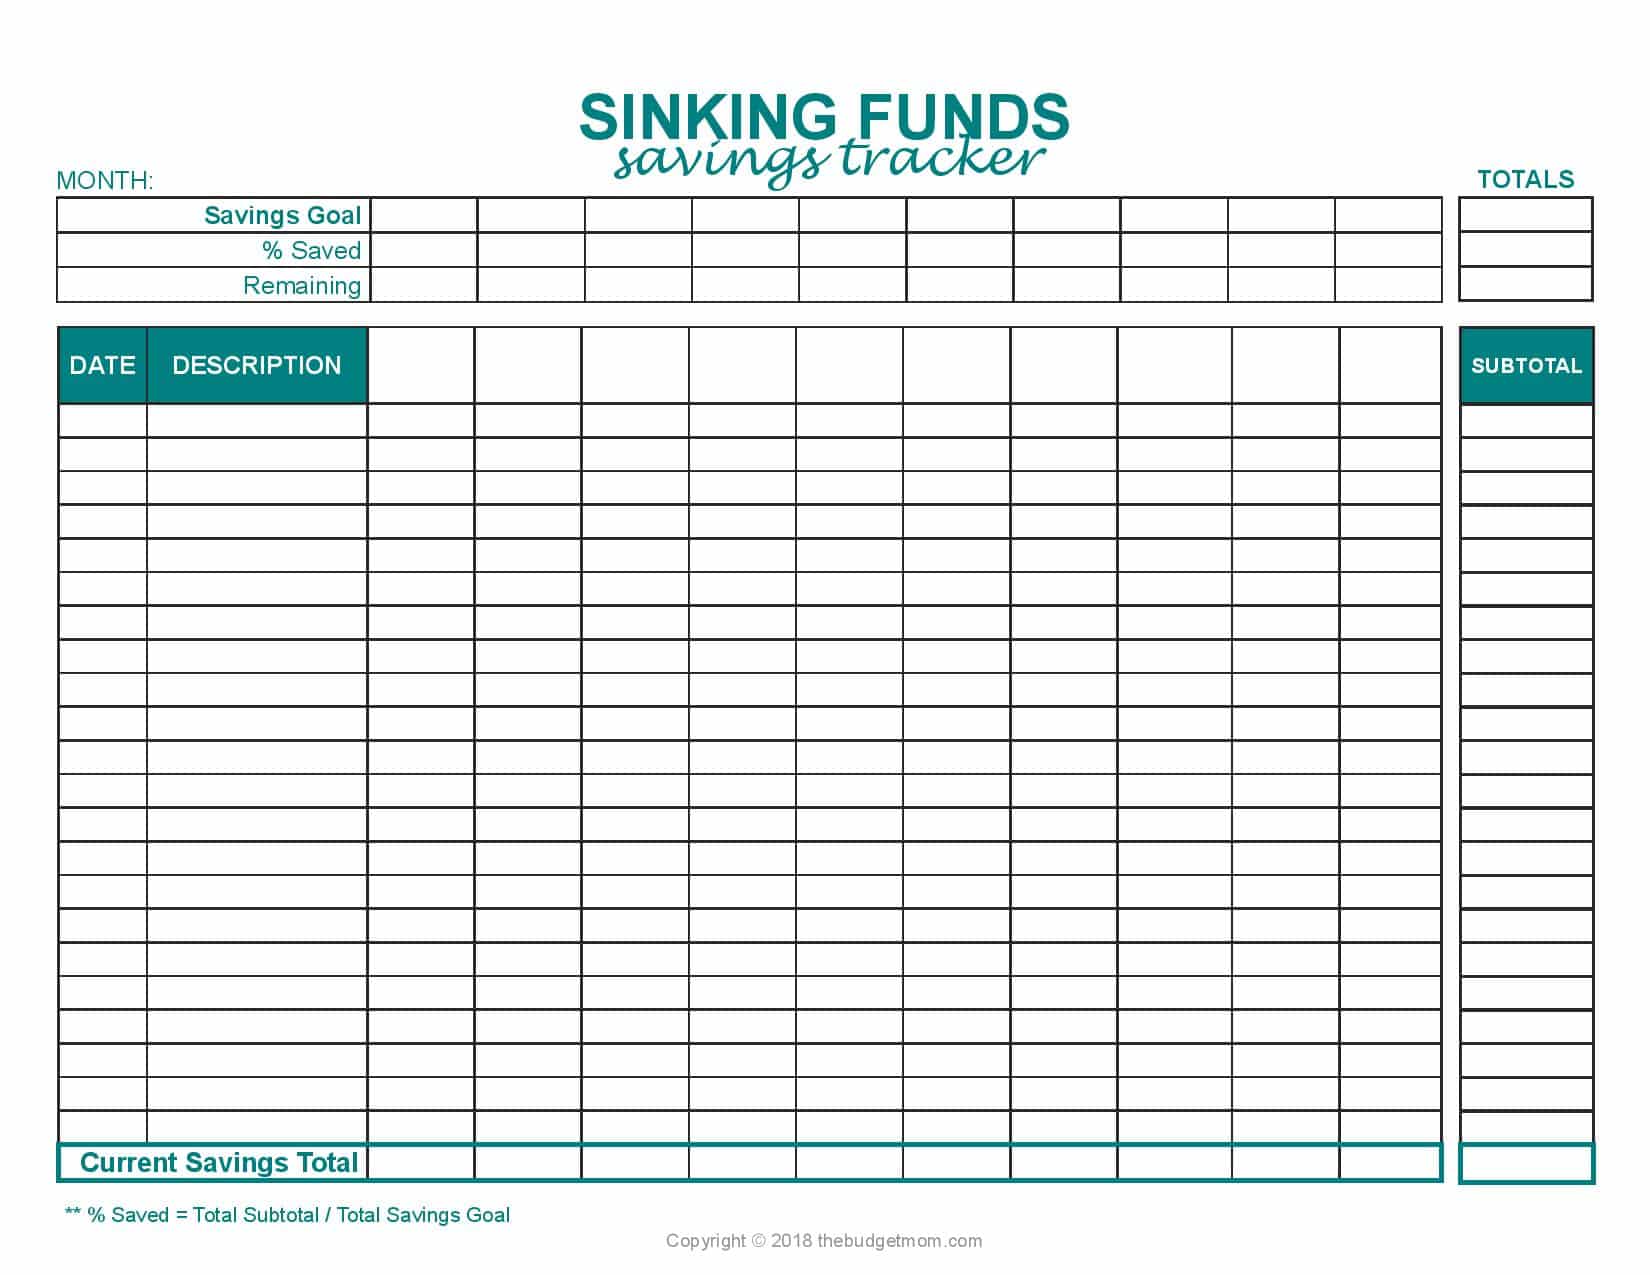 Sinking Funds Savings Tracker-page-001